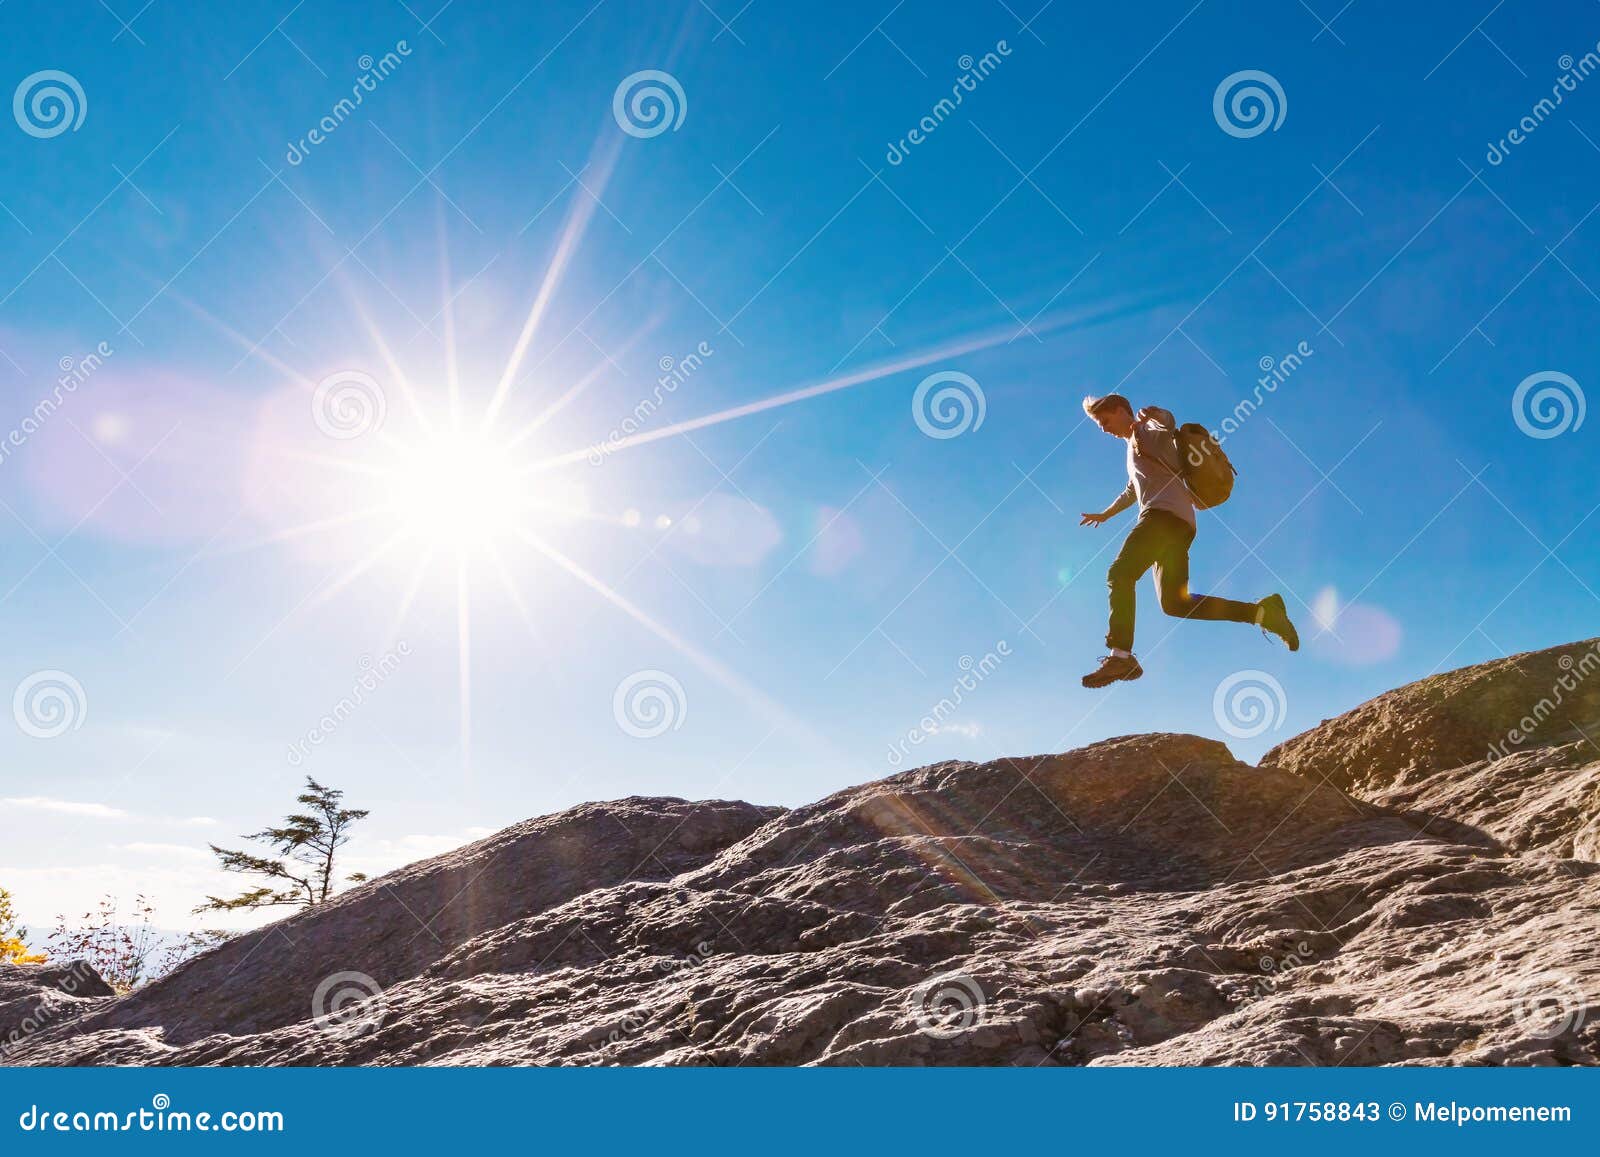 man jumping over gap on mountain hike